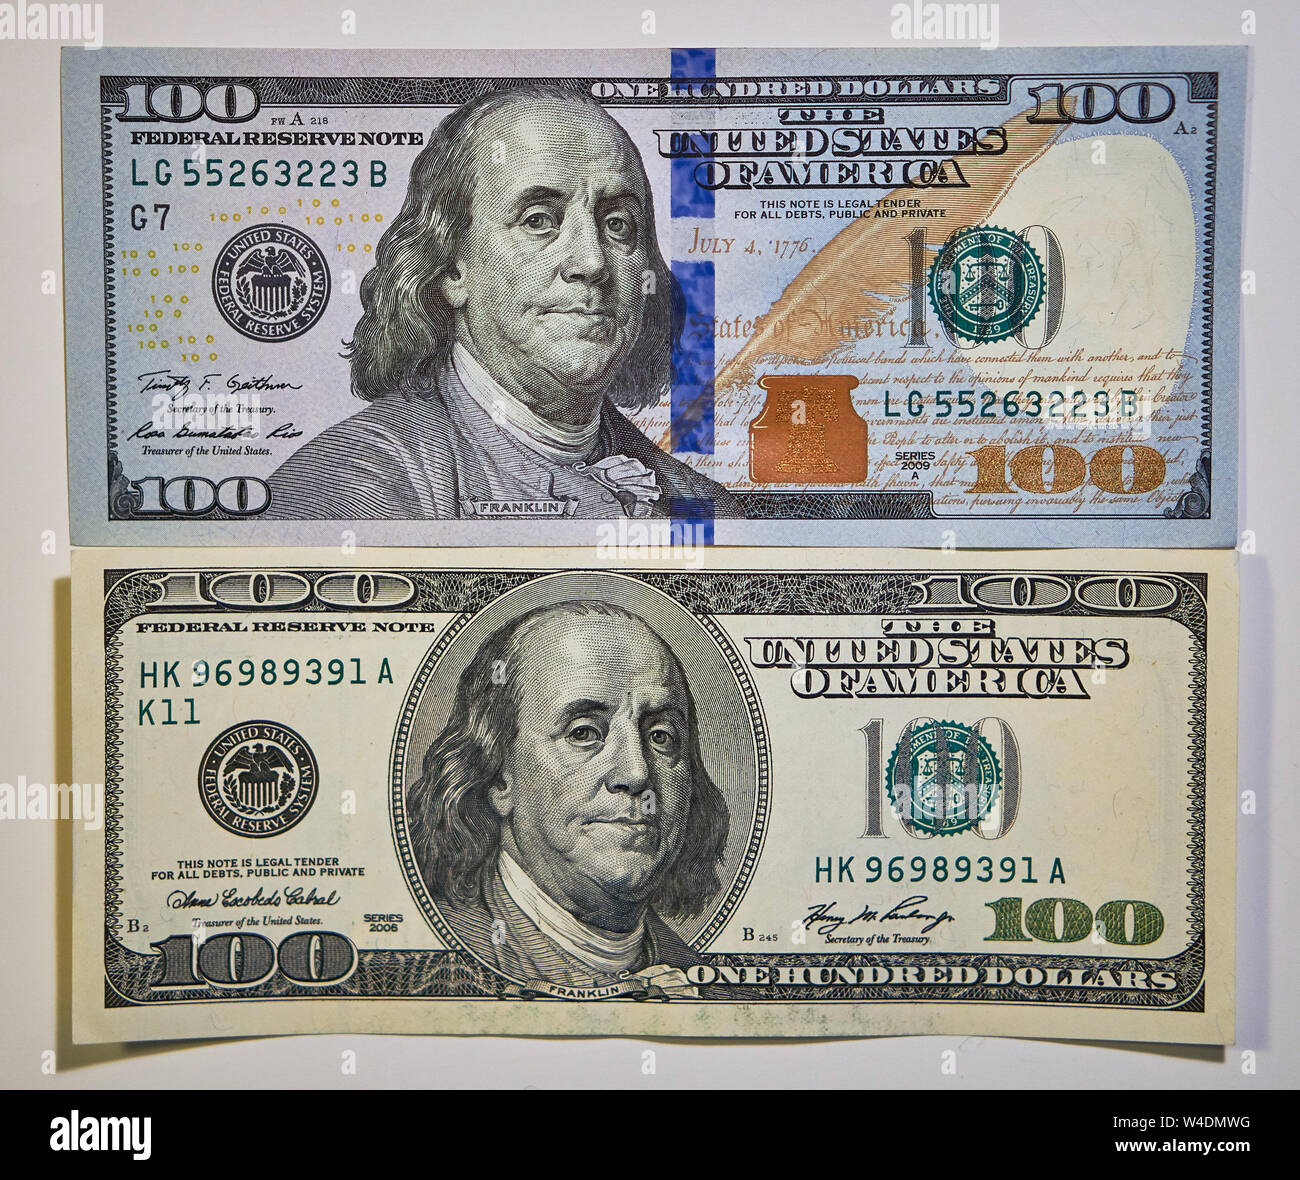 Compare old and new notes of 100 US dollars on a white background Stock Photo